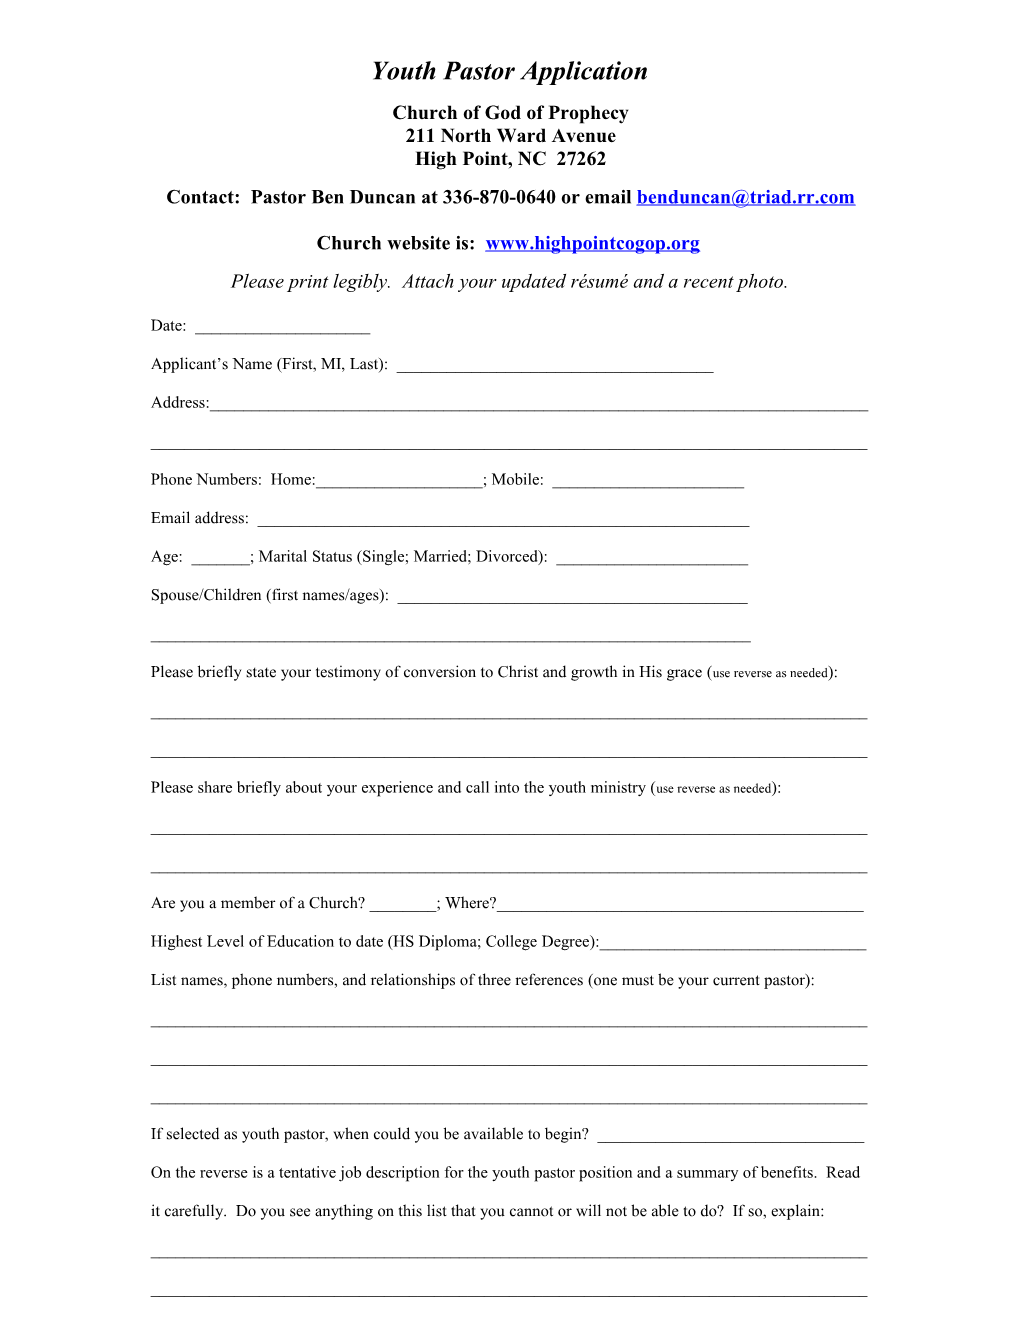 Youth Pastor Application